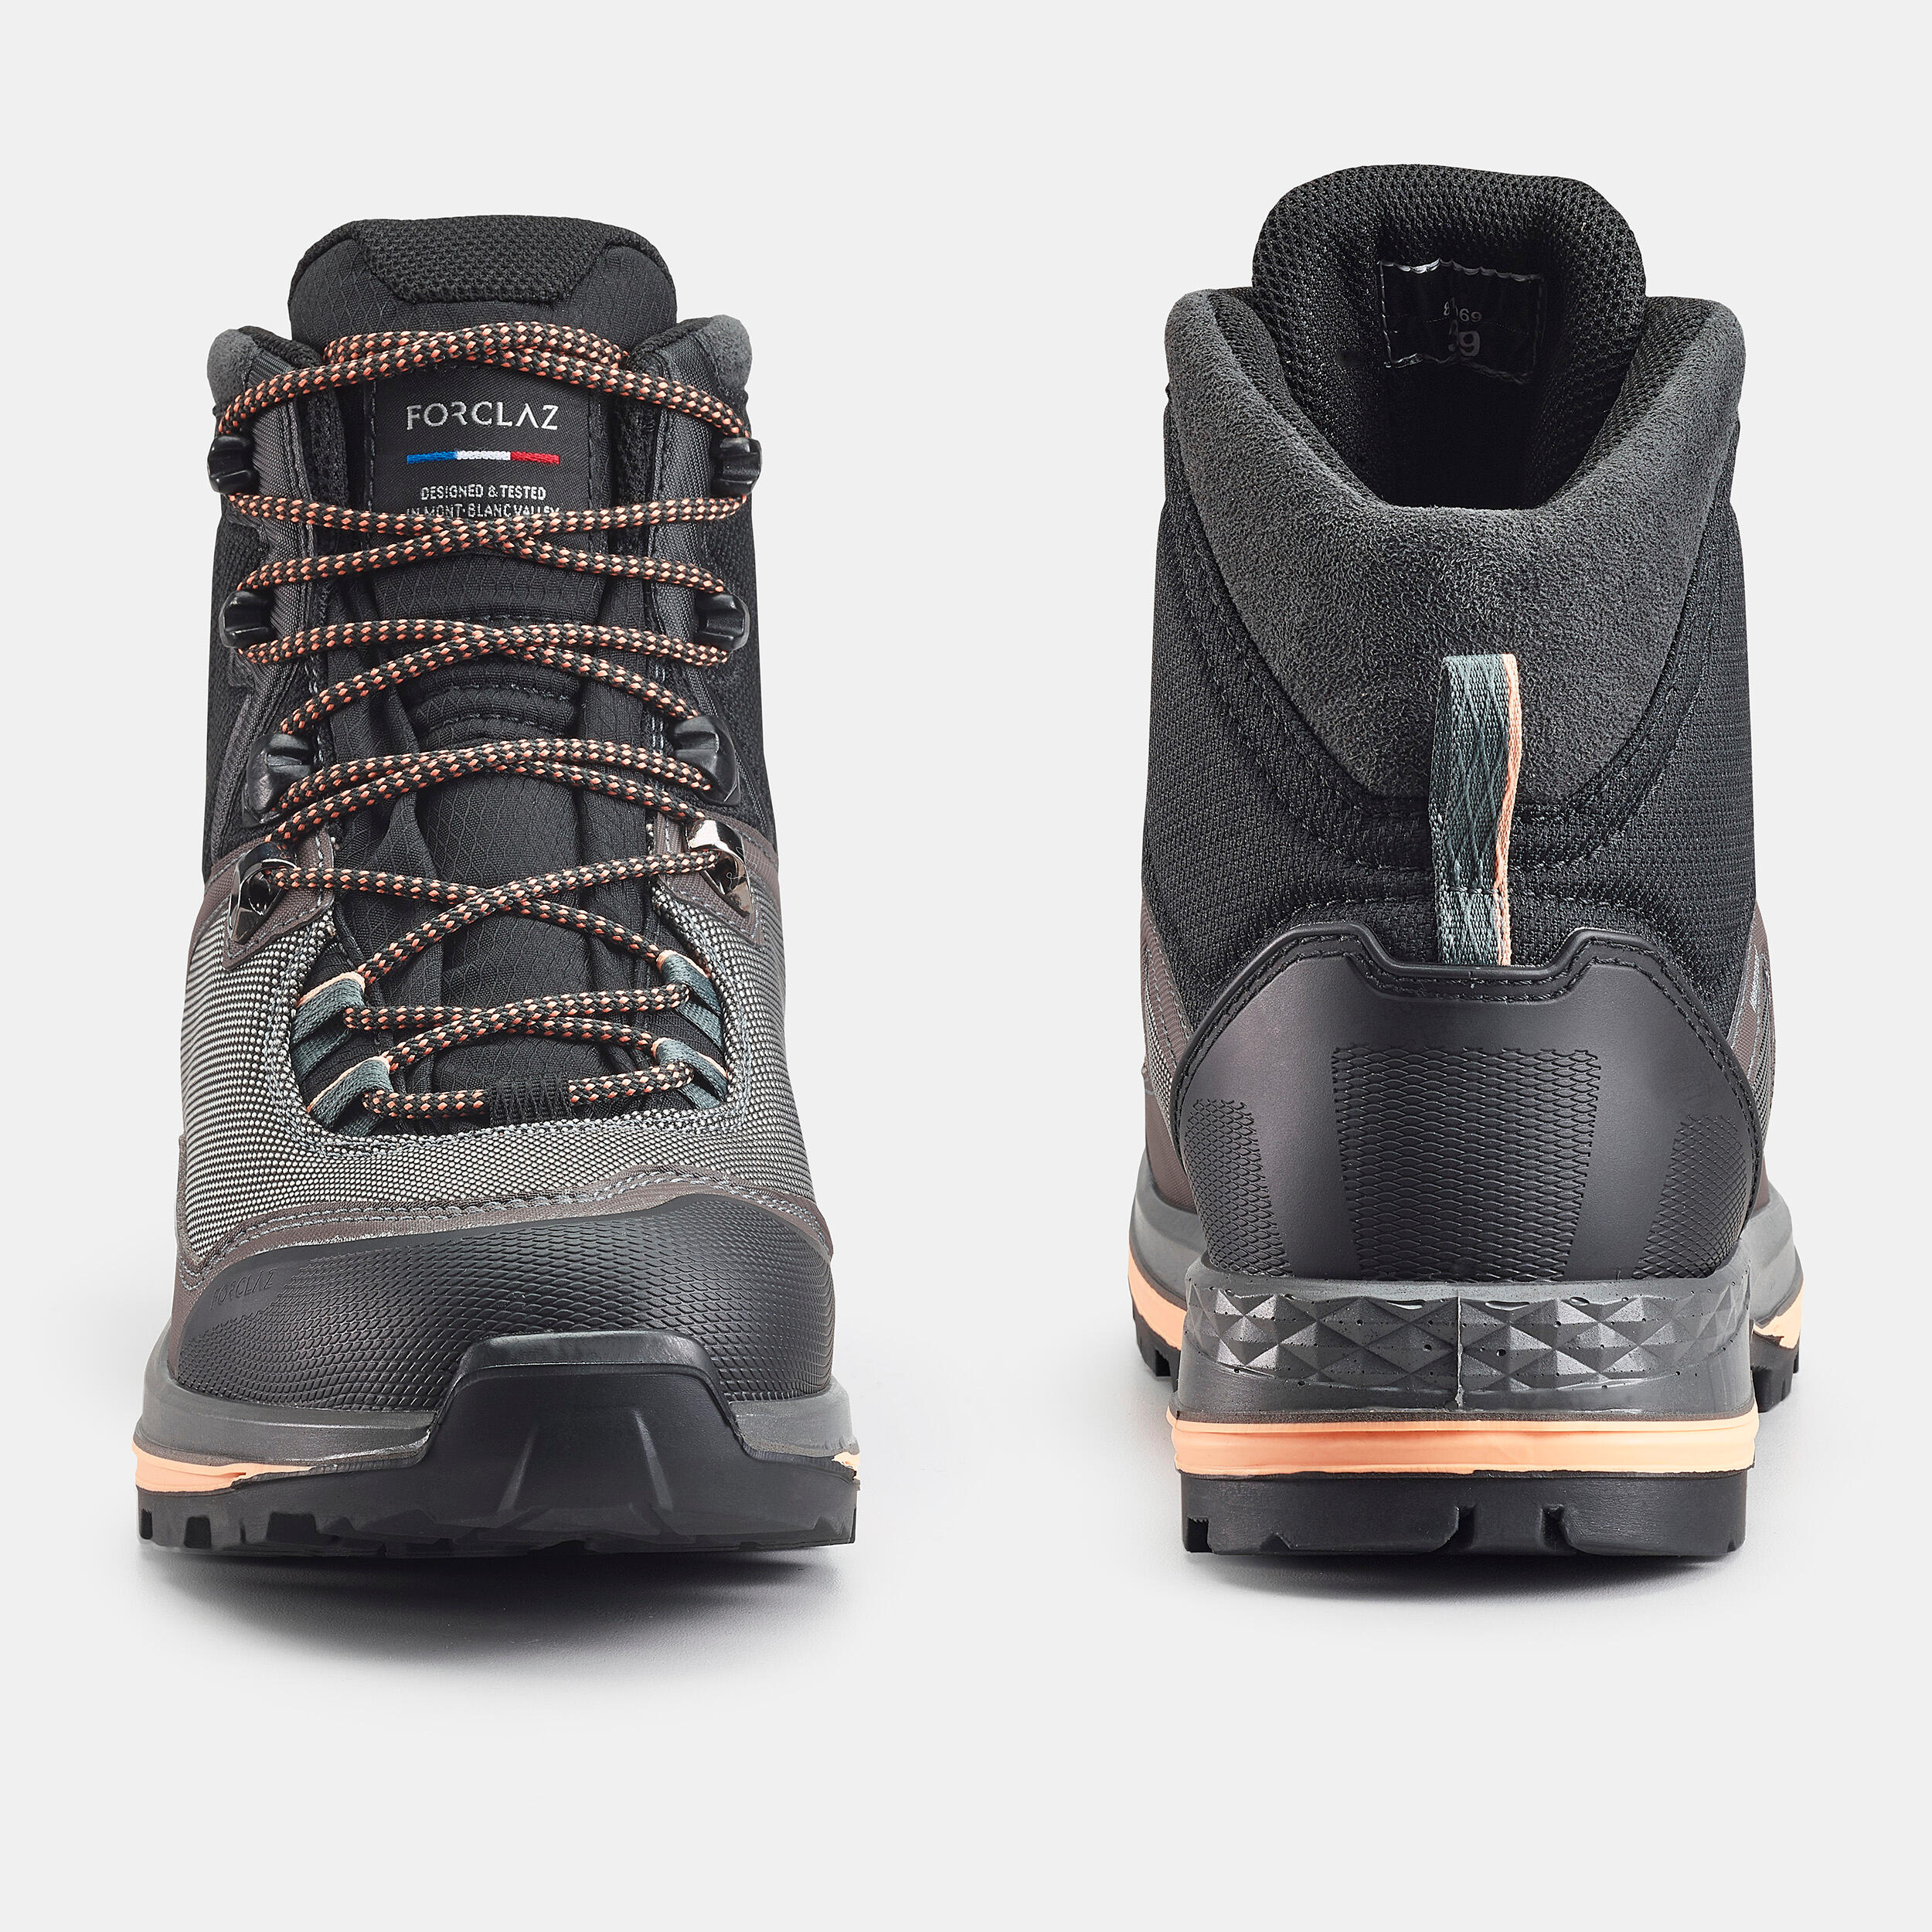 Garmont® North America: Premier footwear brand for mountaineering, hiking  and other outdoor pursuits.